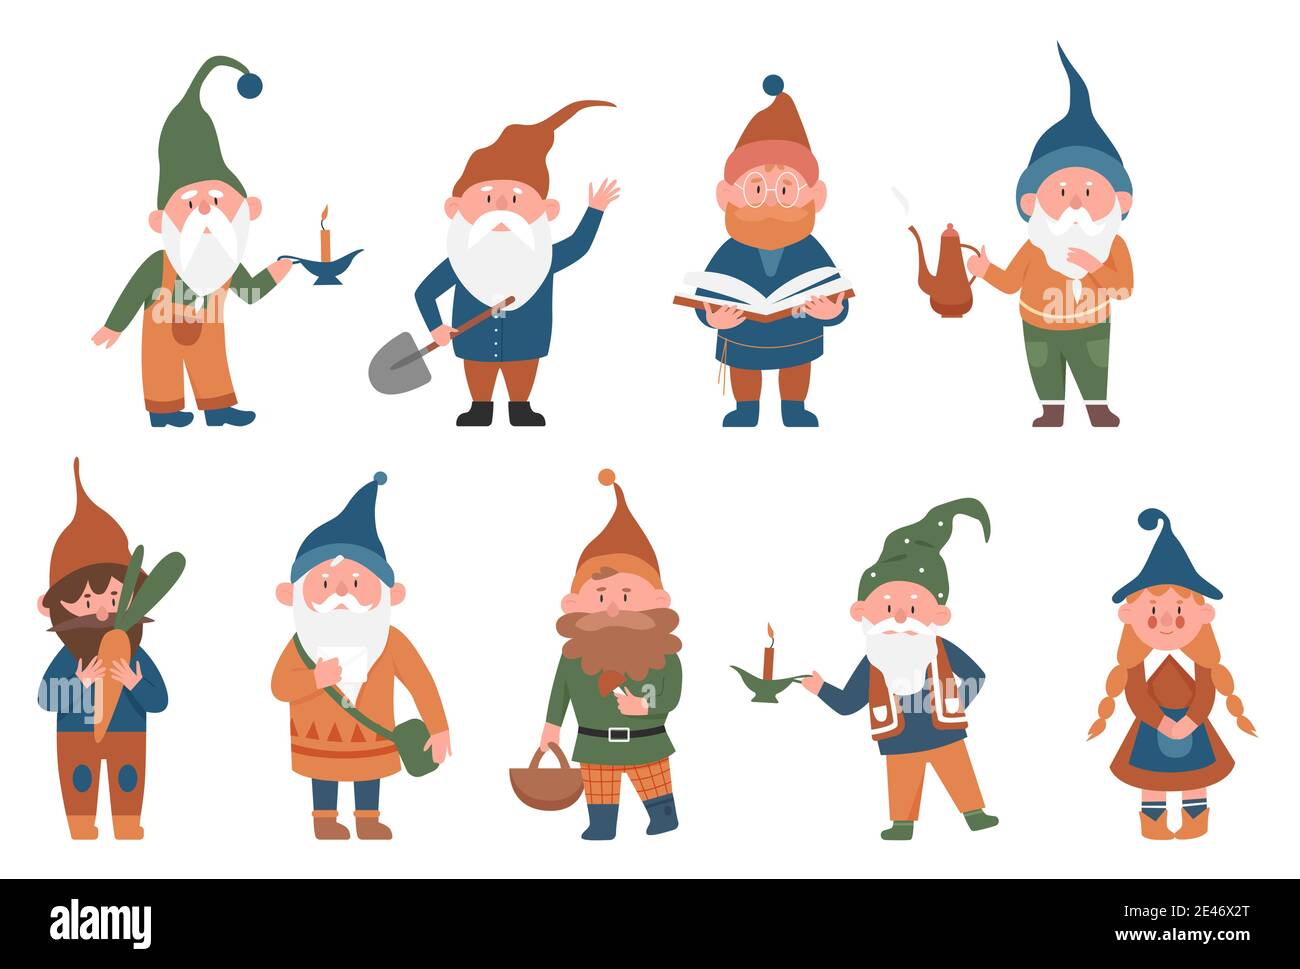 Cute fairytale gnomes vector illustration set. Cartoon funny gnome or dwarf male female fairy character standing in various poses, holding mushroom, working in garden, reading book isolated on white Stock Vector